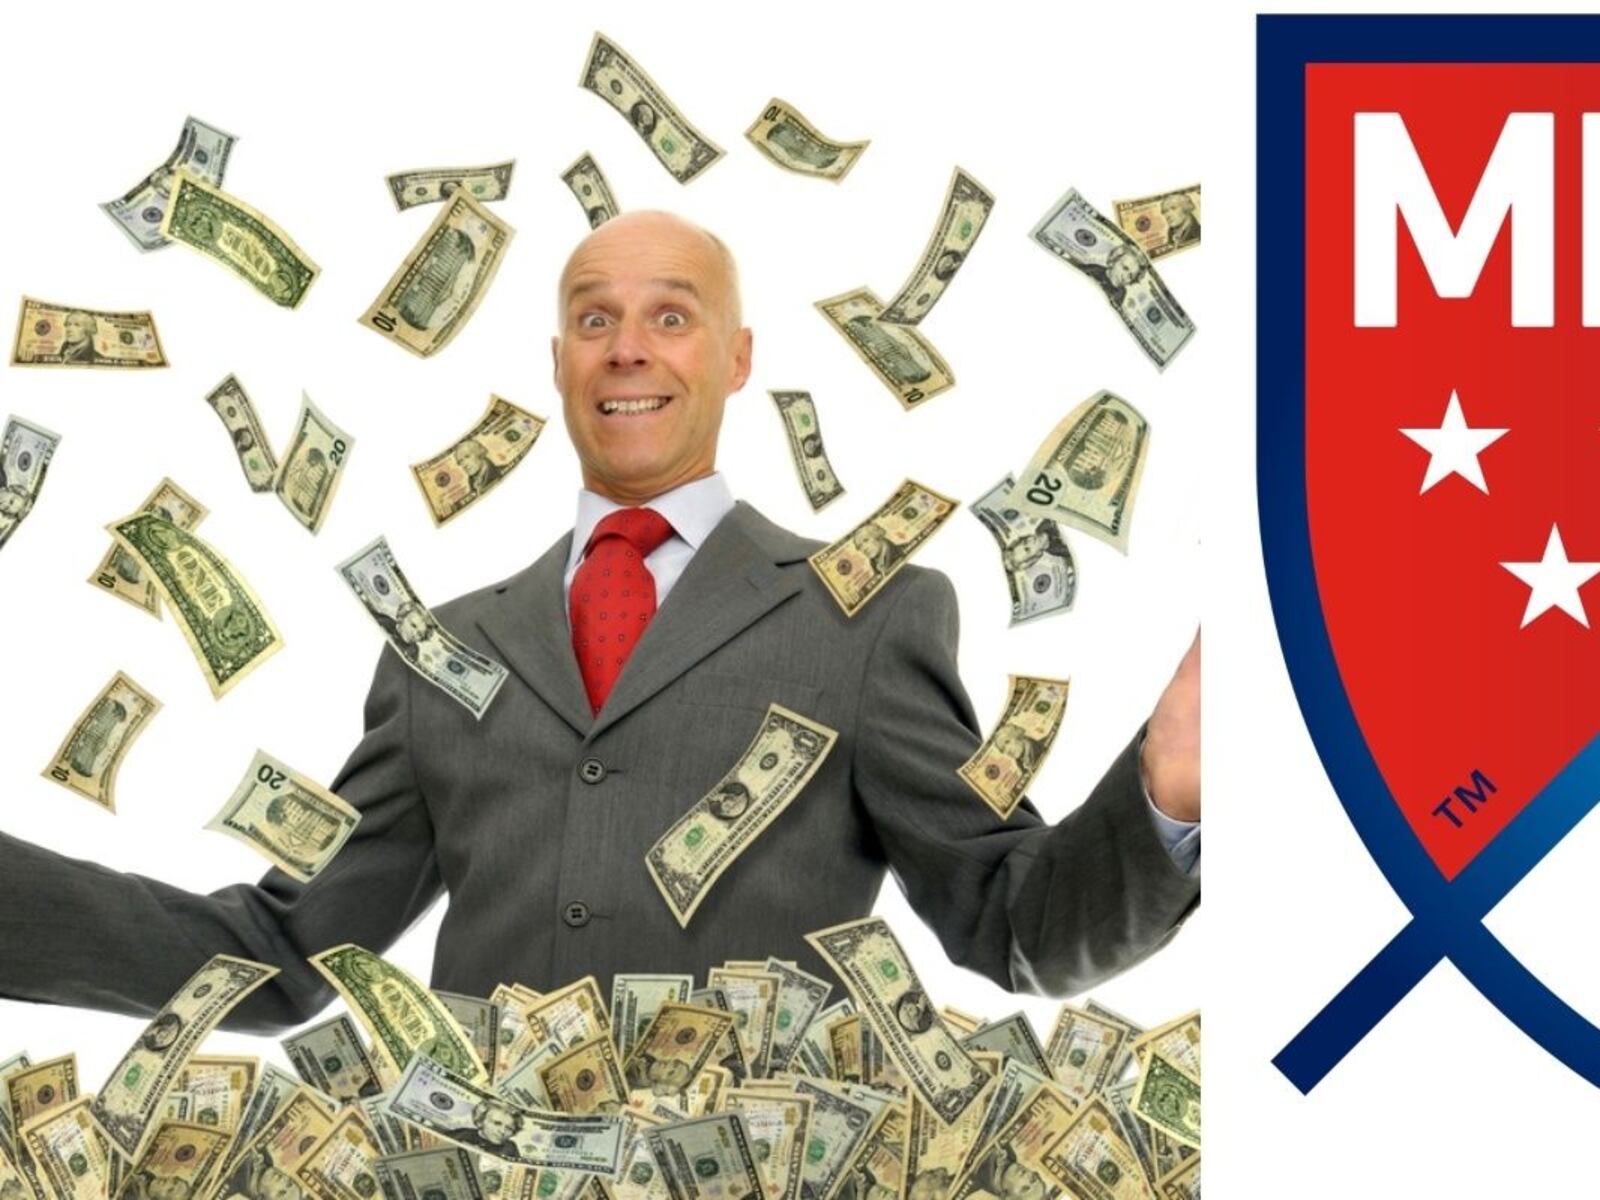 This Mexican was a fiasco in the MLS and now he is a millionaire with a strange profession